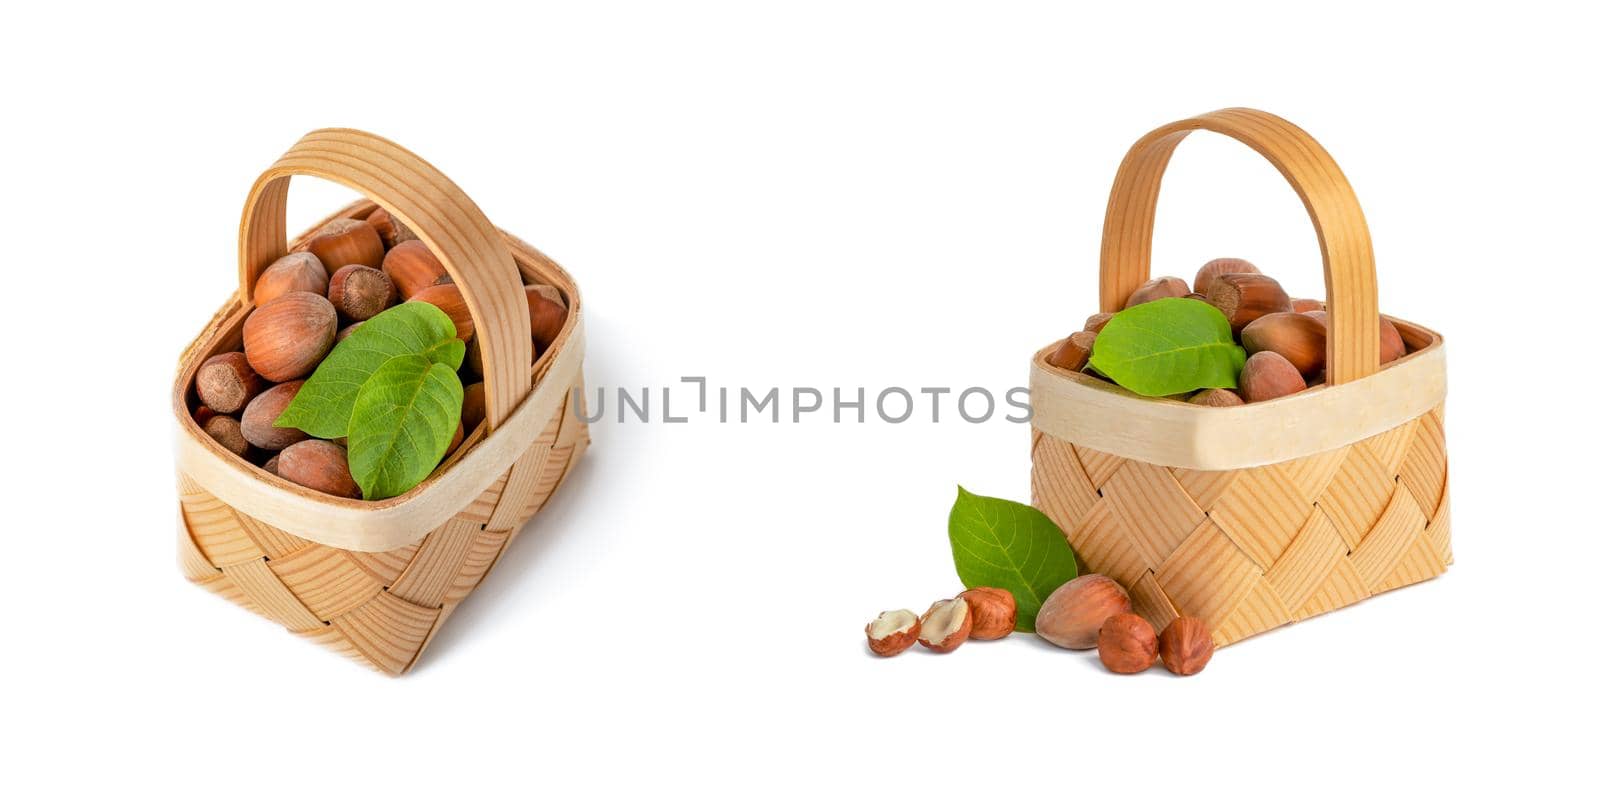 Hazelnut lies in a wooden basket on a white isolated background. Unpeeled hazelnuts in shell and green leaves.